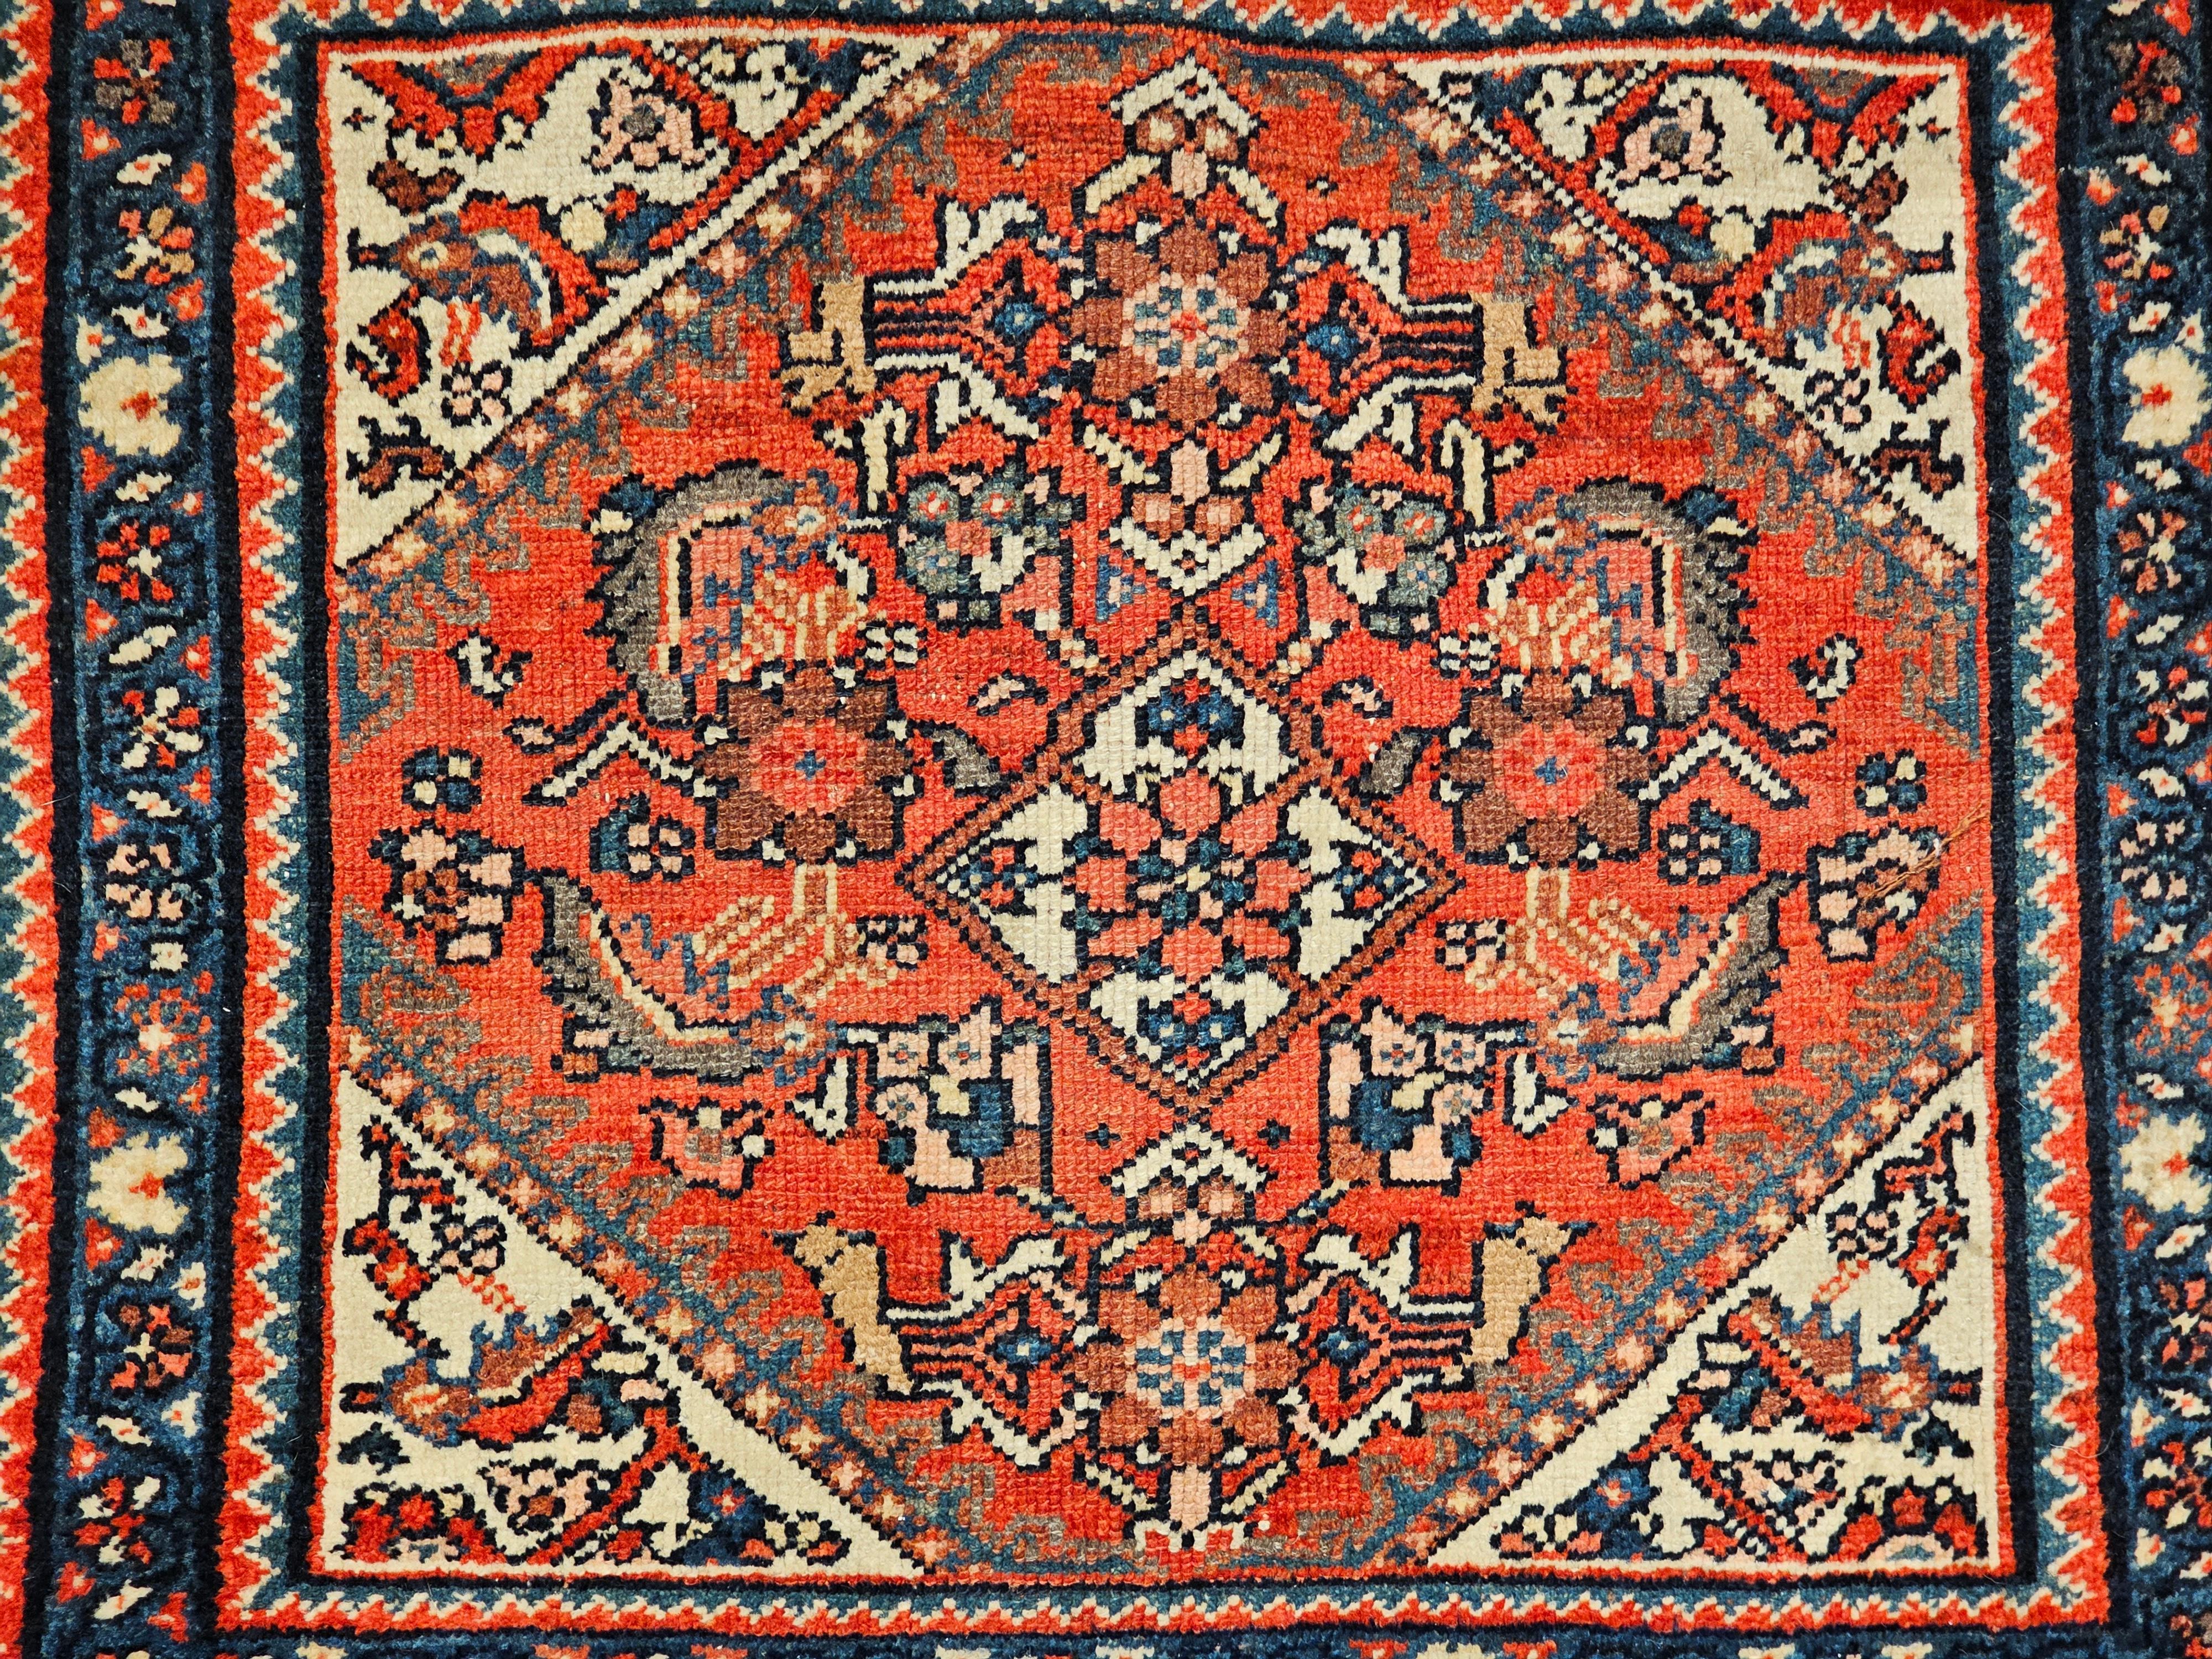 Early 20th century Persian Malayer Tribal Bagface Used as Nomadic Wall Art. The Malayer bag face from NW Persia was woven by the tribes in the late 1800s. It could have been either the face of a saddlebag or the side panels for a mafrash (large